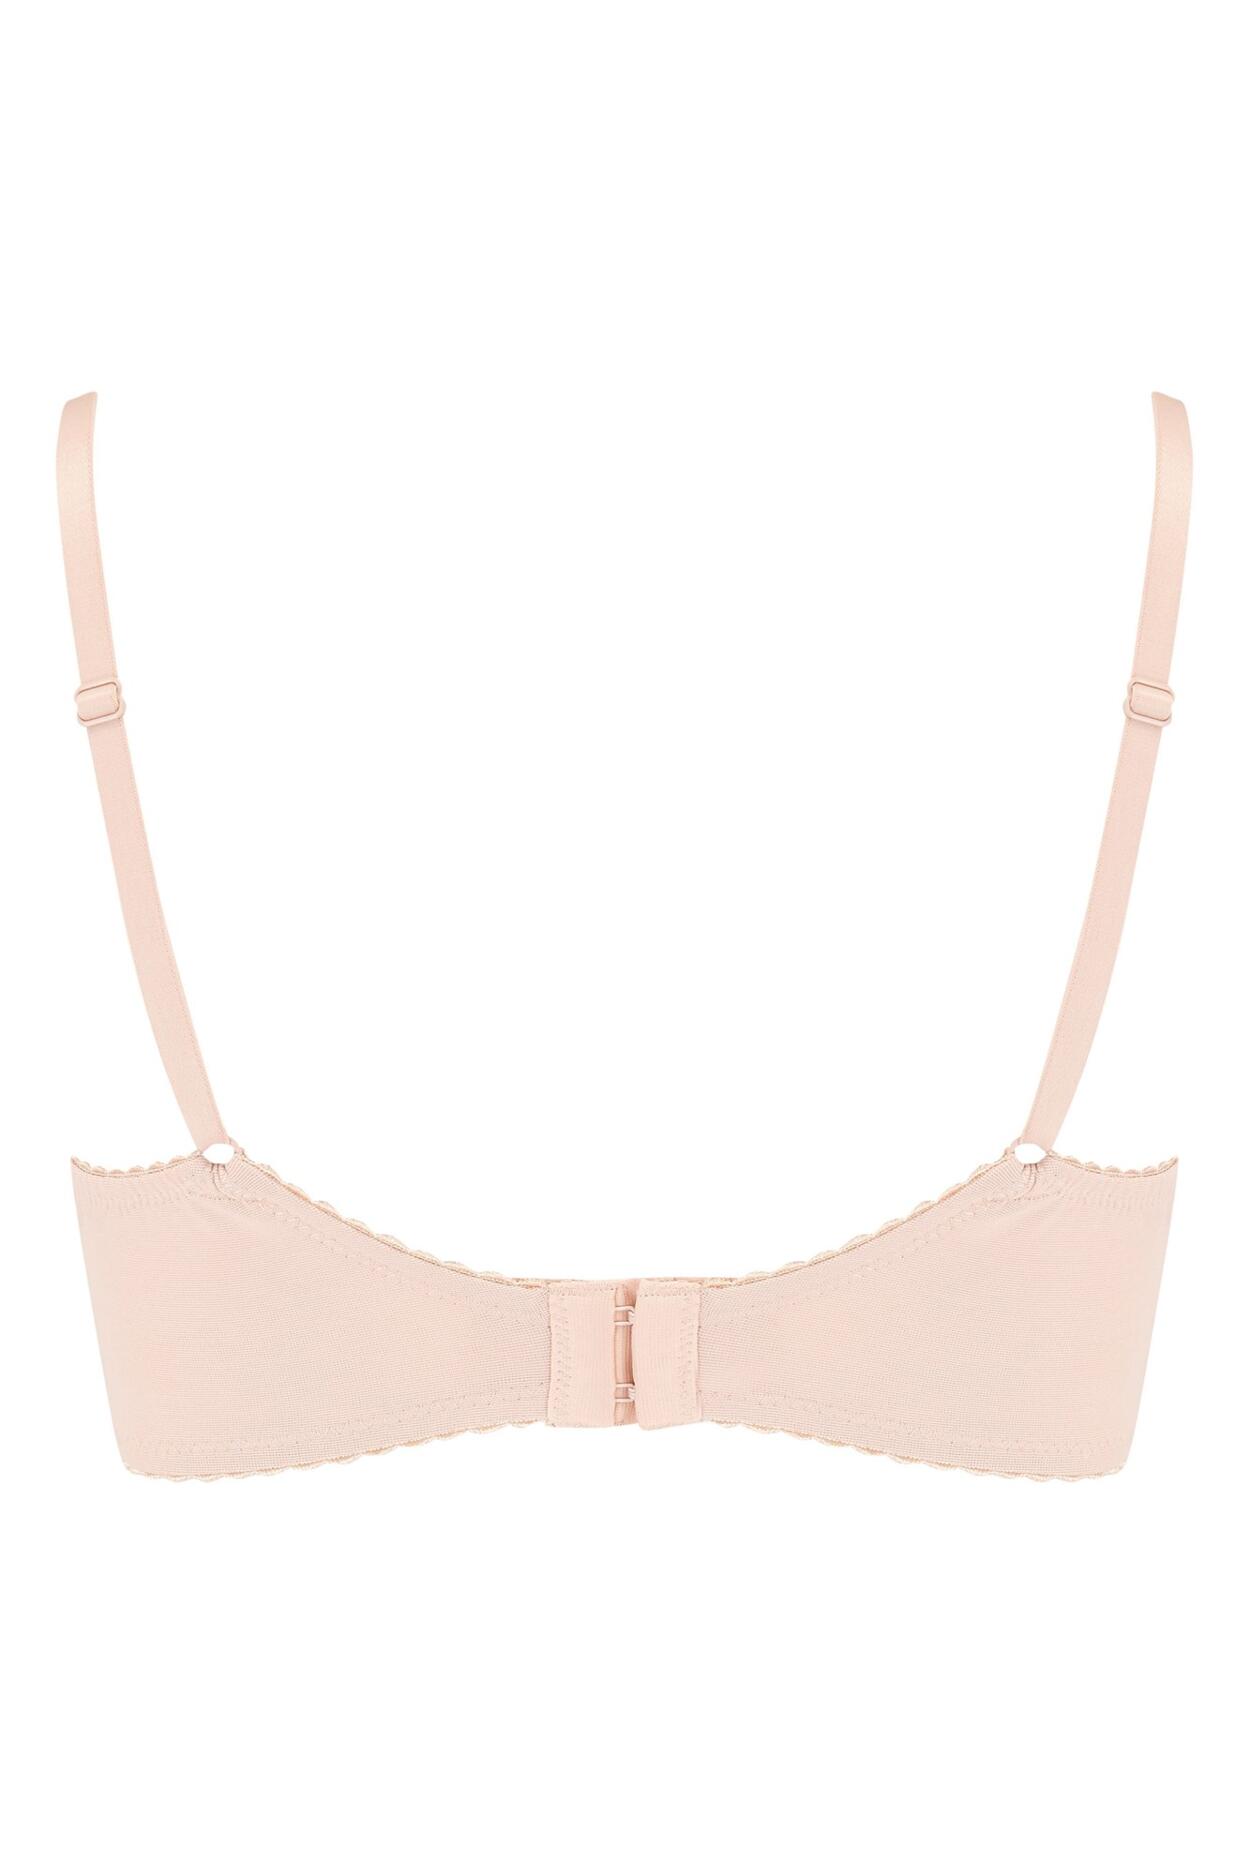 Rosalind Full Cup Underwired Bra in Brulee | Pour Moi